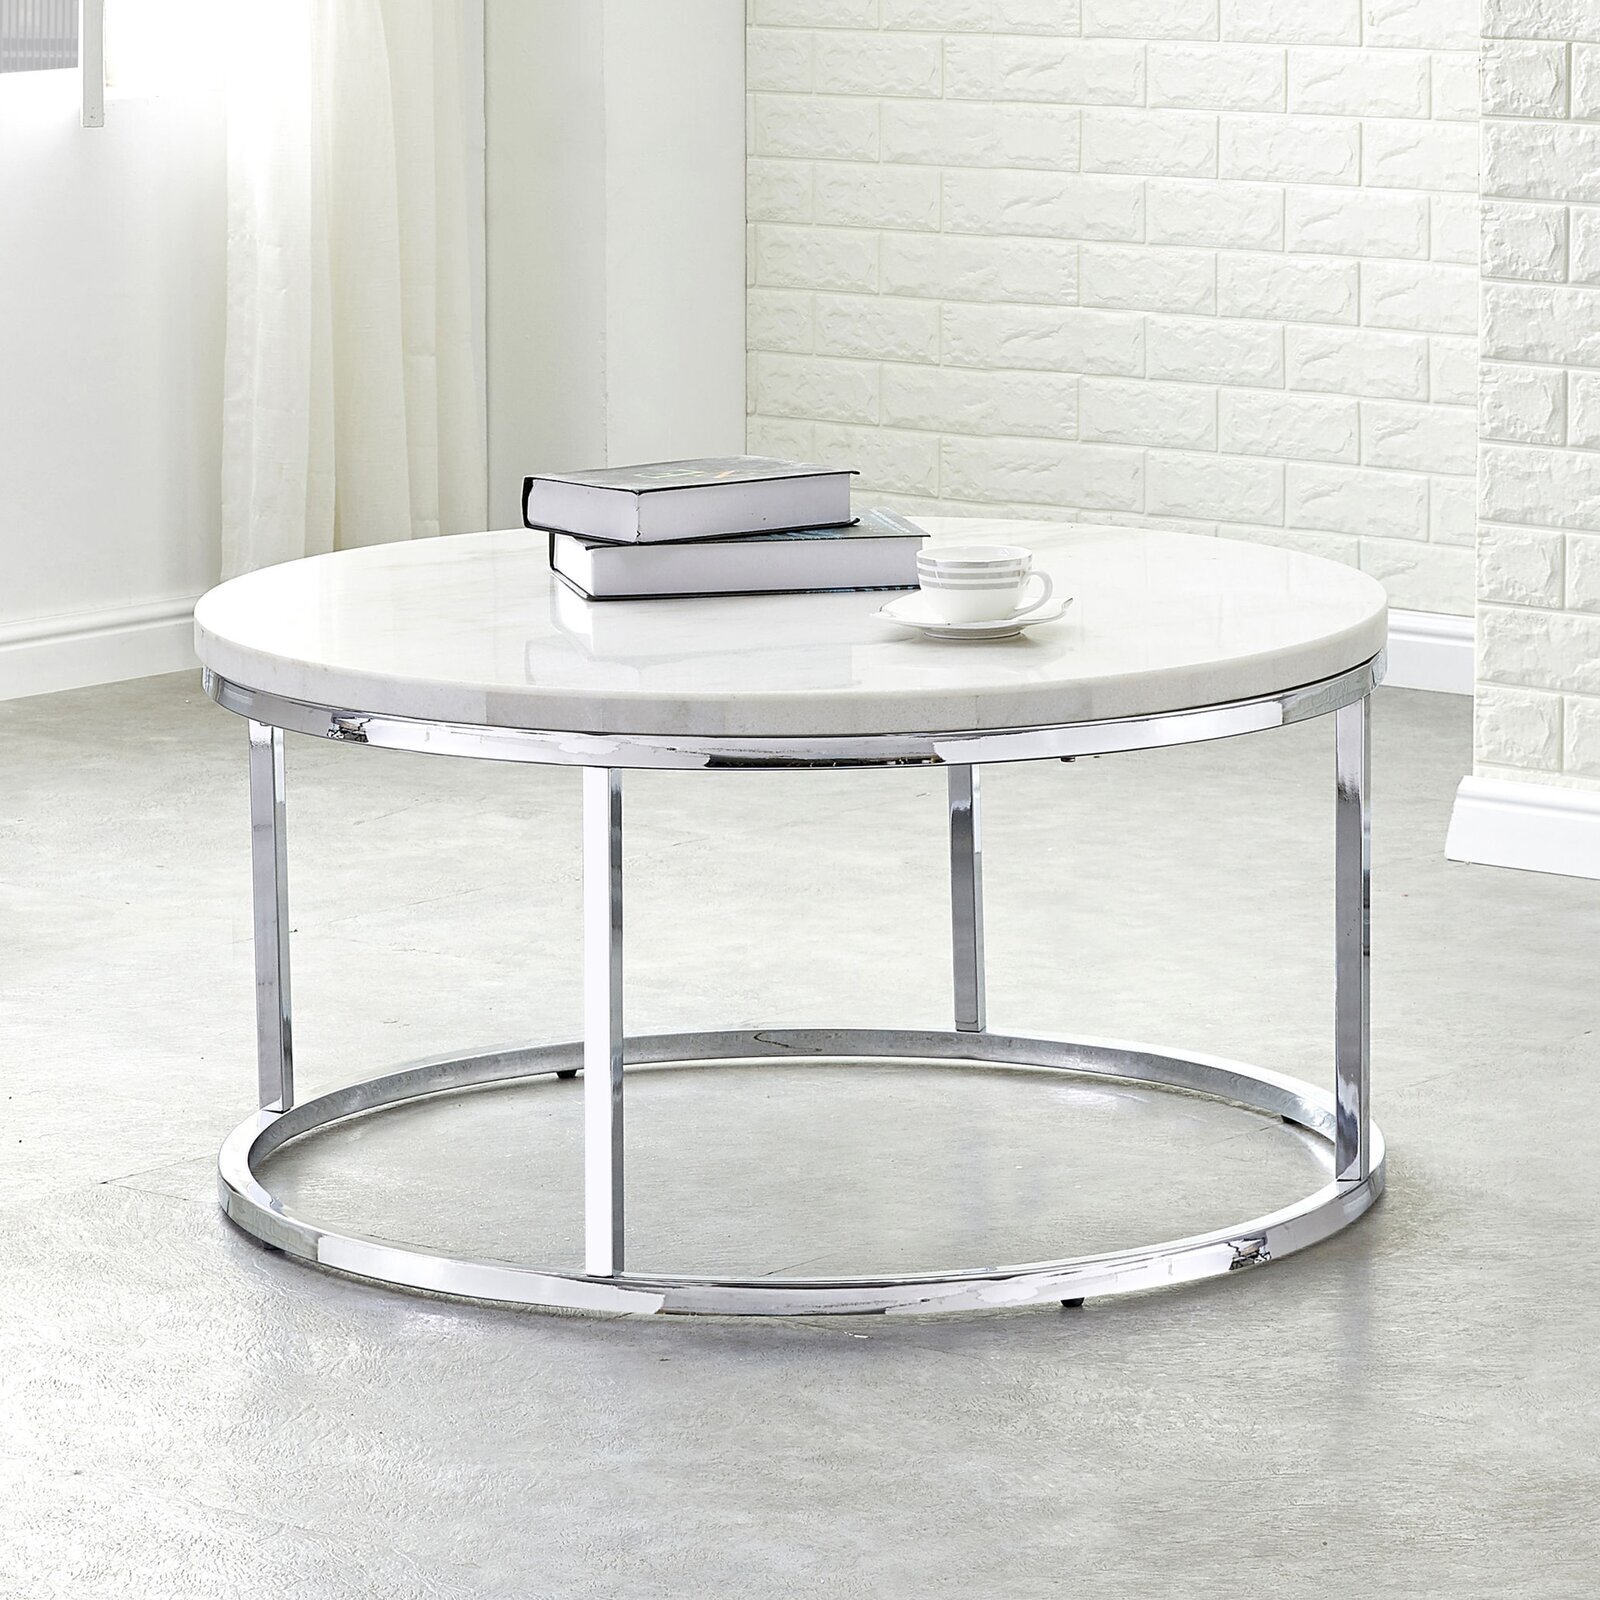 Round Chrome Coffee Table With Marble Top 